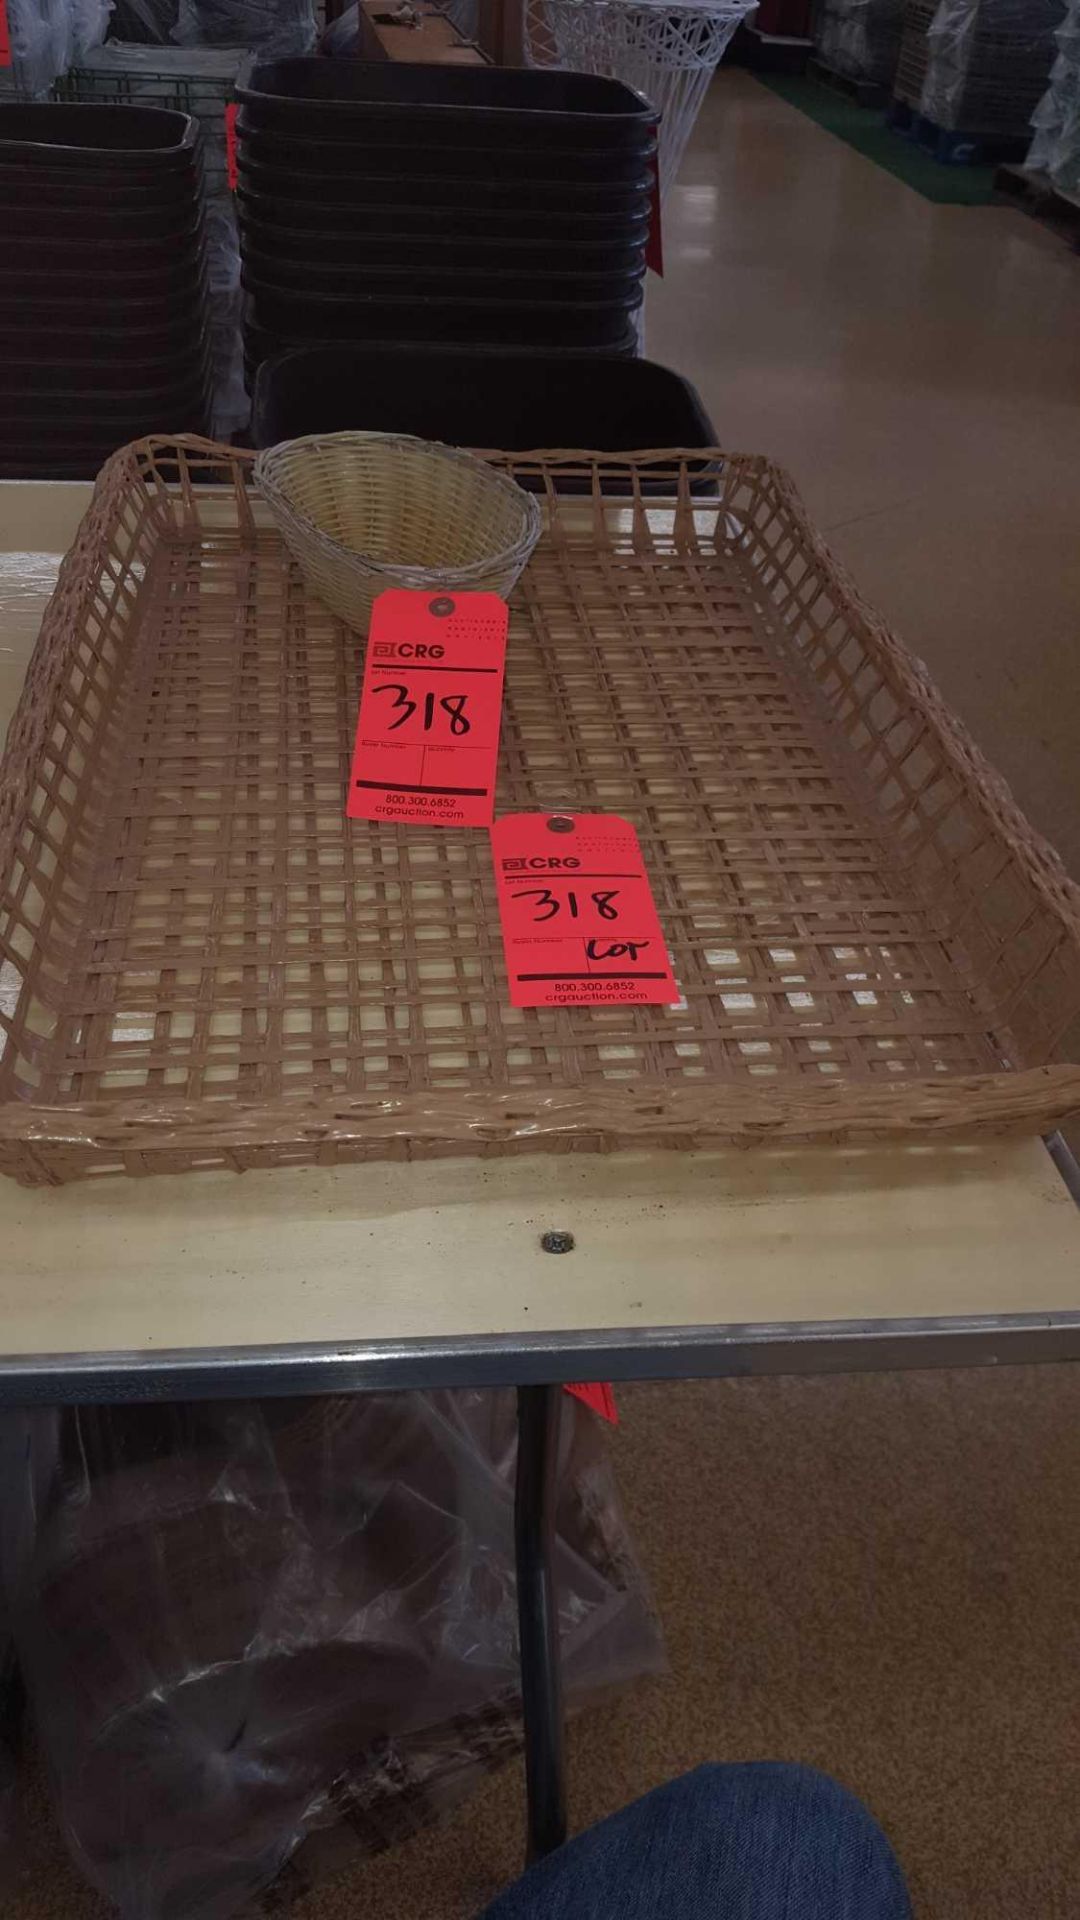 One lot of 2 wicker basket trays, 18 inch by 26 in, and 35 oval bread baskets.